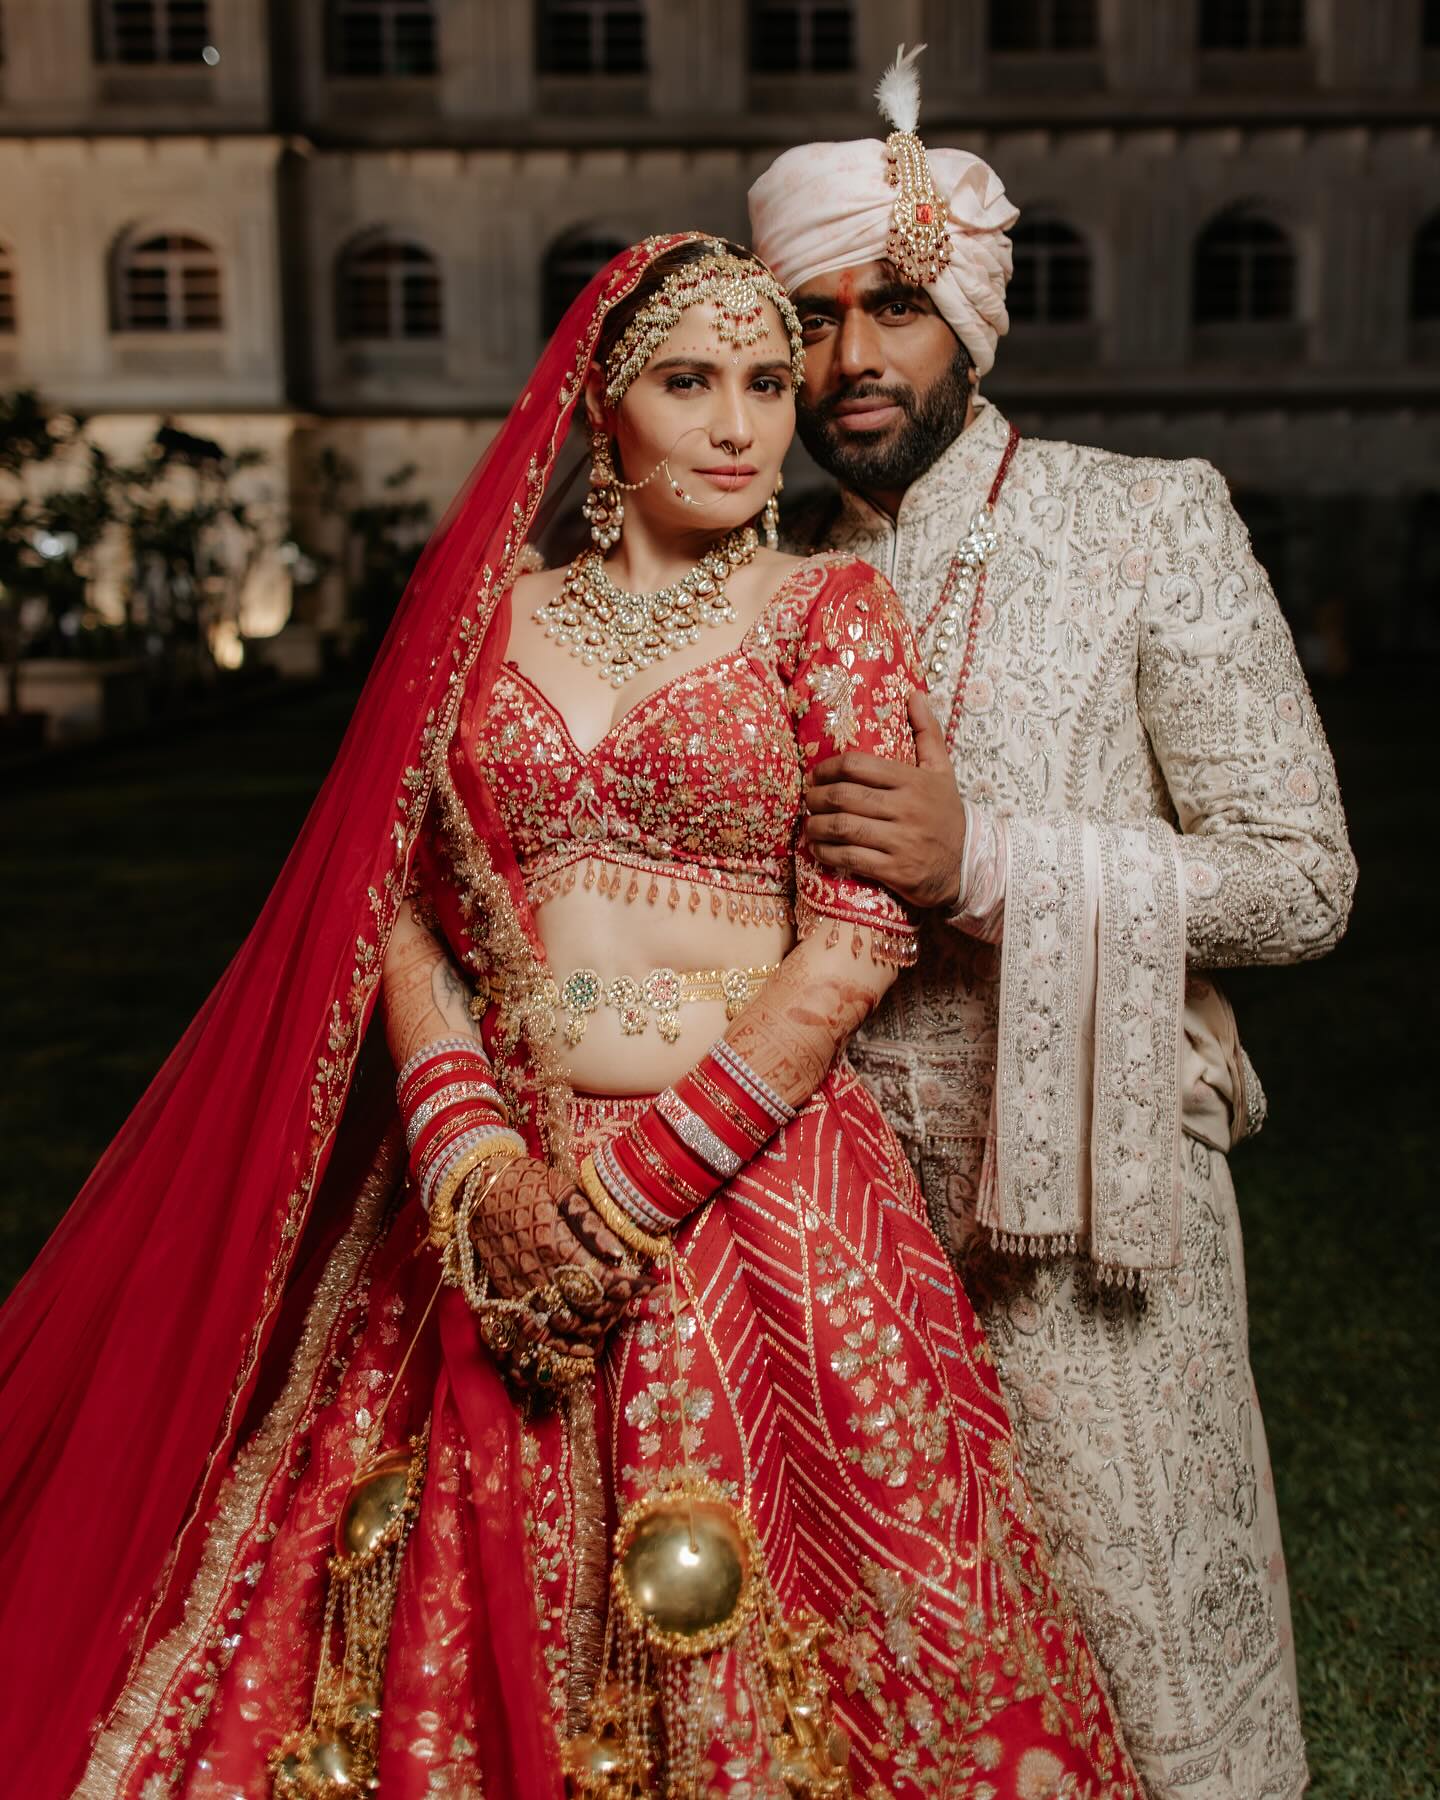 Arti Singh and Dipak Chauhan in their wedding picture